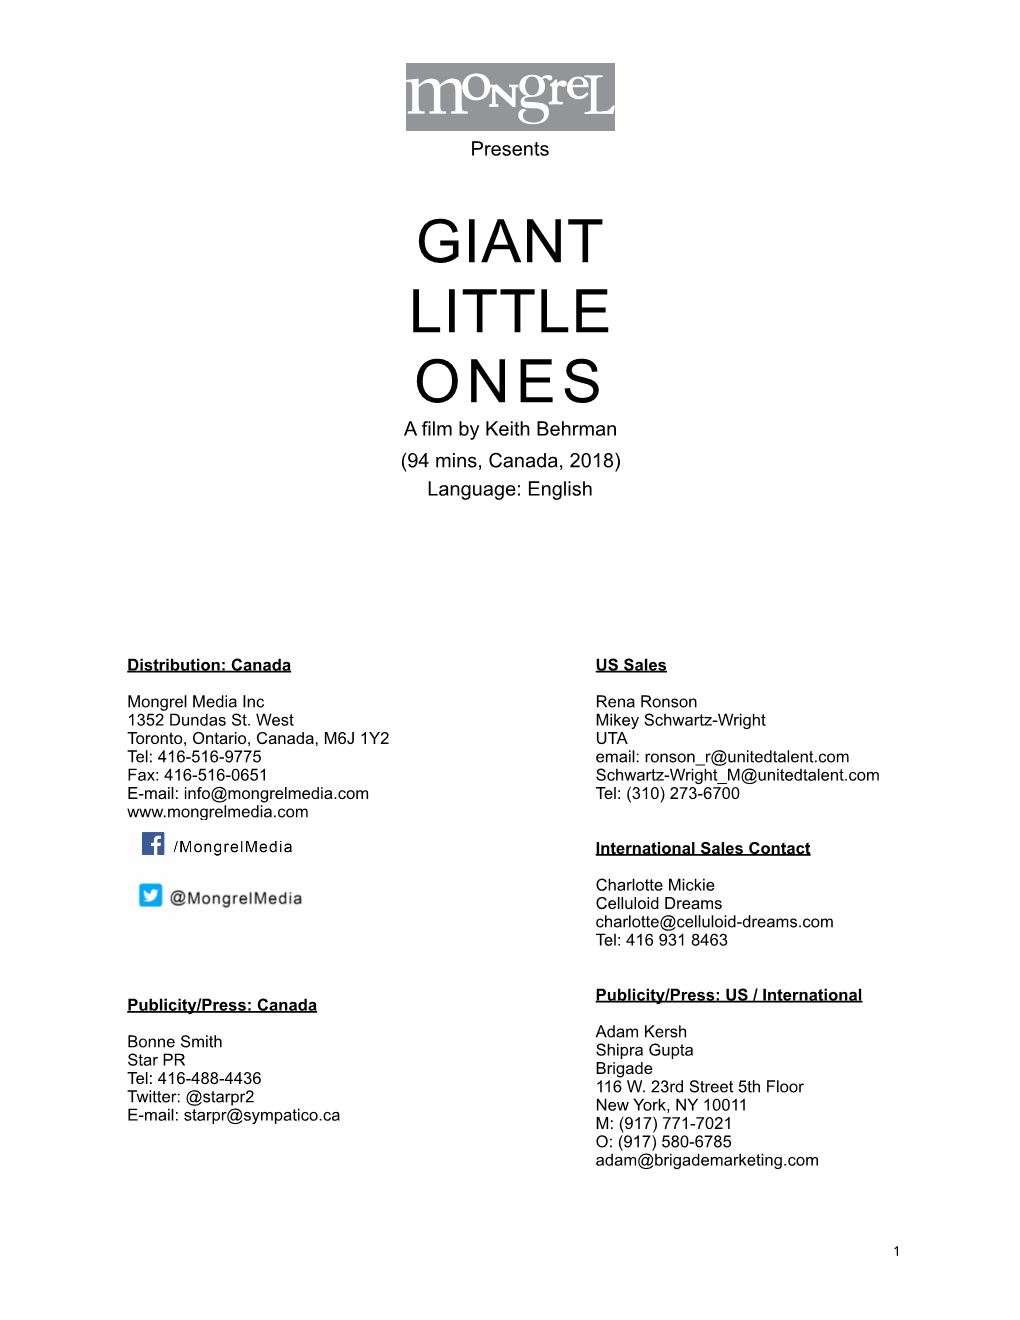 GIANT LITTLE ONES a Film by Keith Behrman (94 Mins, Canada, 2018) Language: English